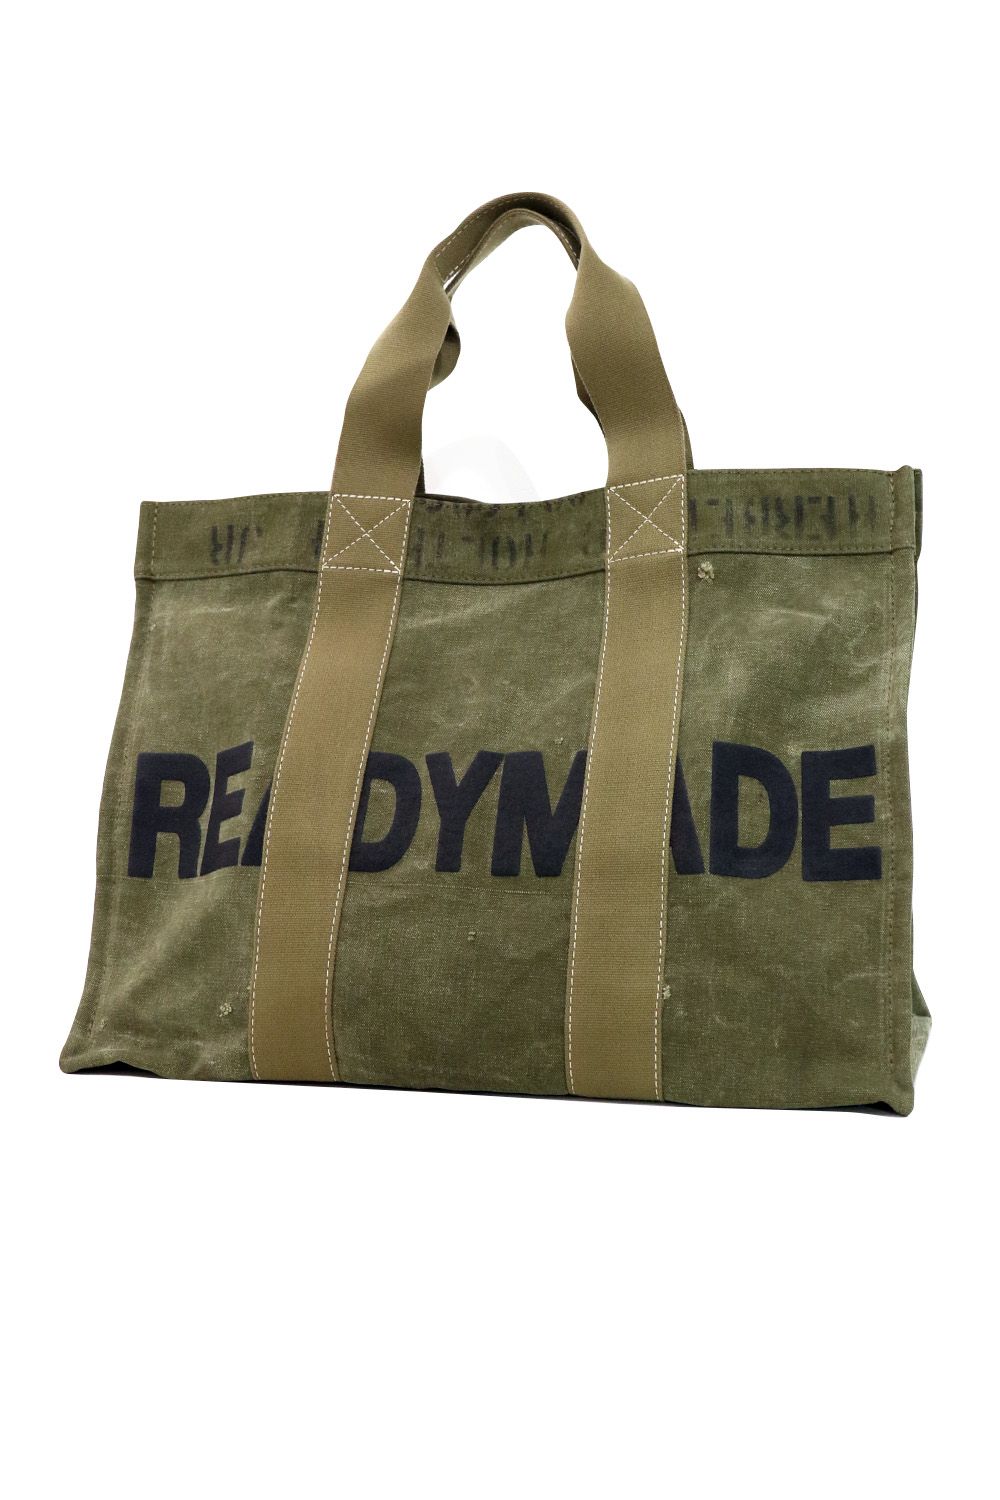 READYMADE EASY TOTE BAG レディメイド バッグ L  白